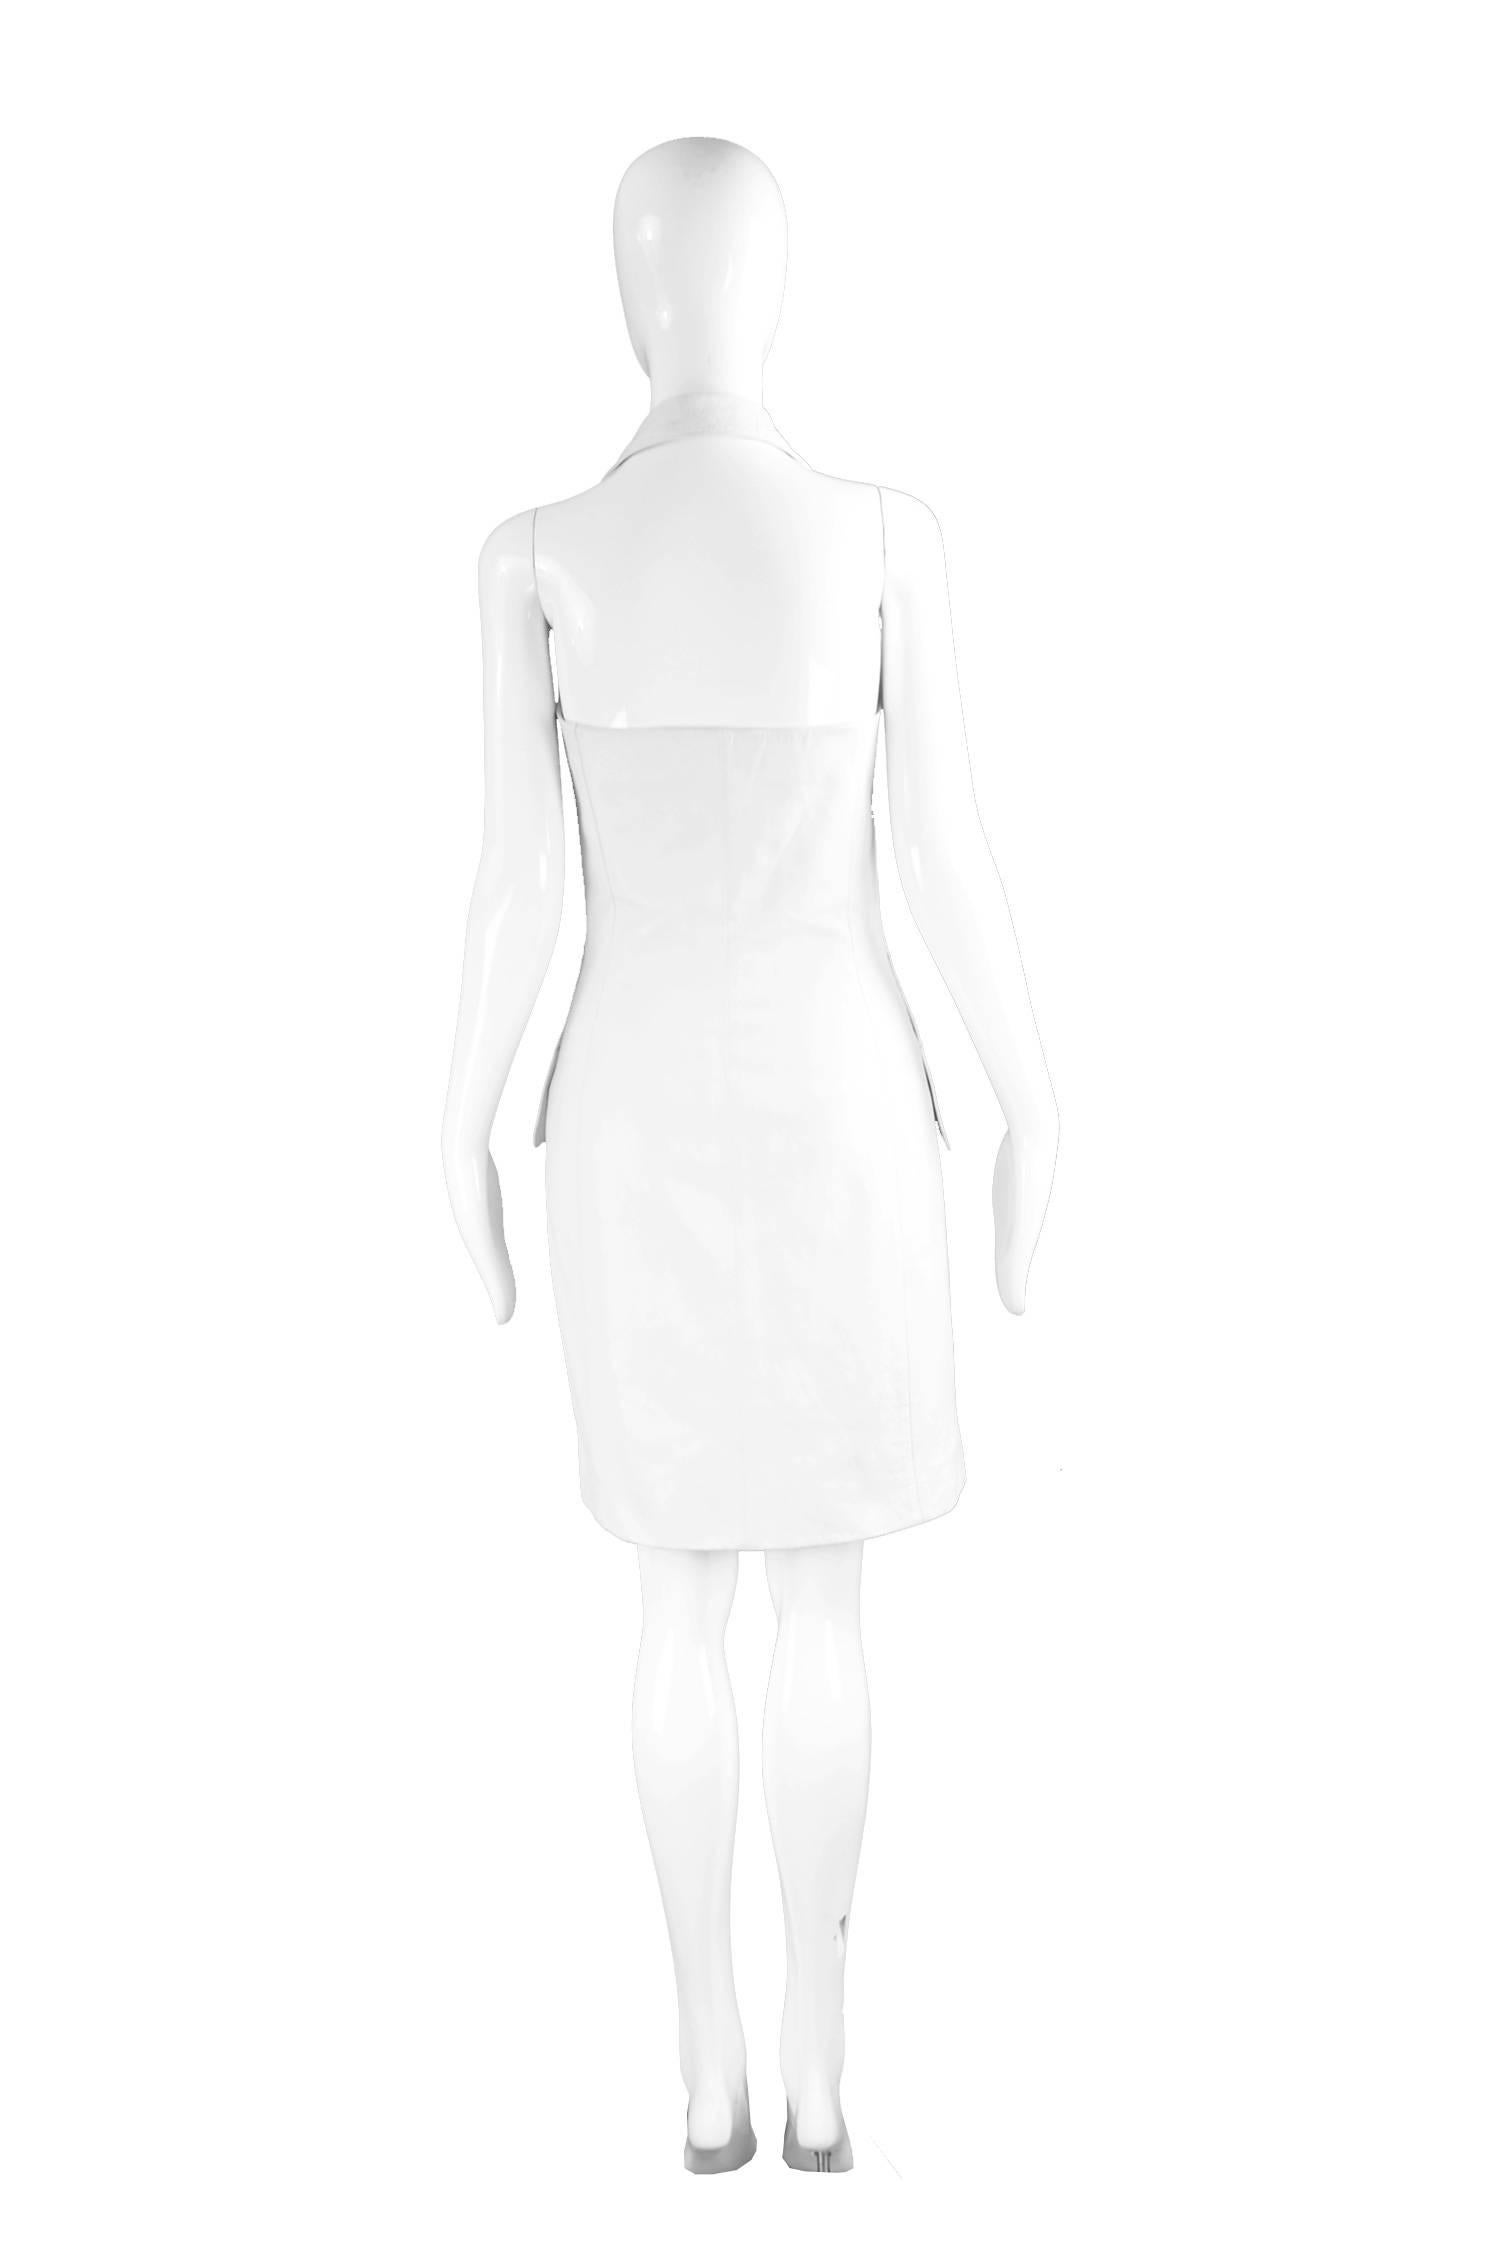 Alexander McQueen for Givenchy Couture 'Cowgirls' White Leather Dress, SS 1998 In Excellent Condition In Doncaster, South Yorkshire